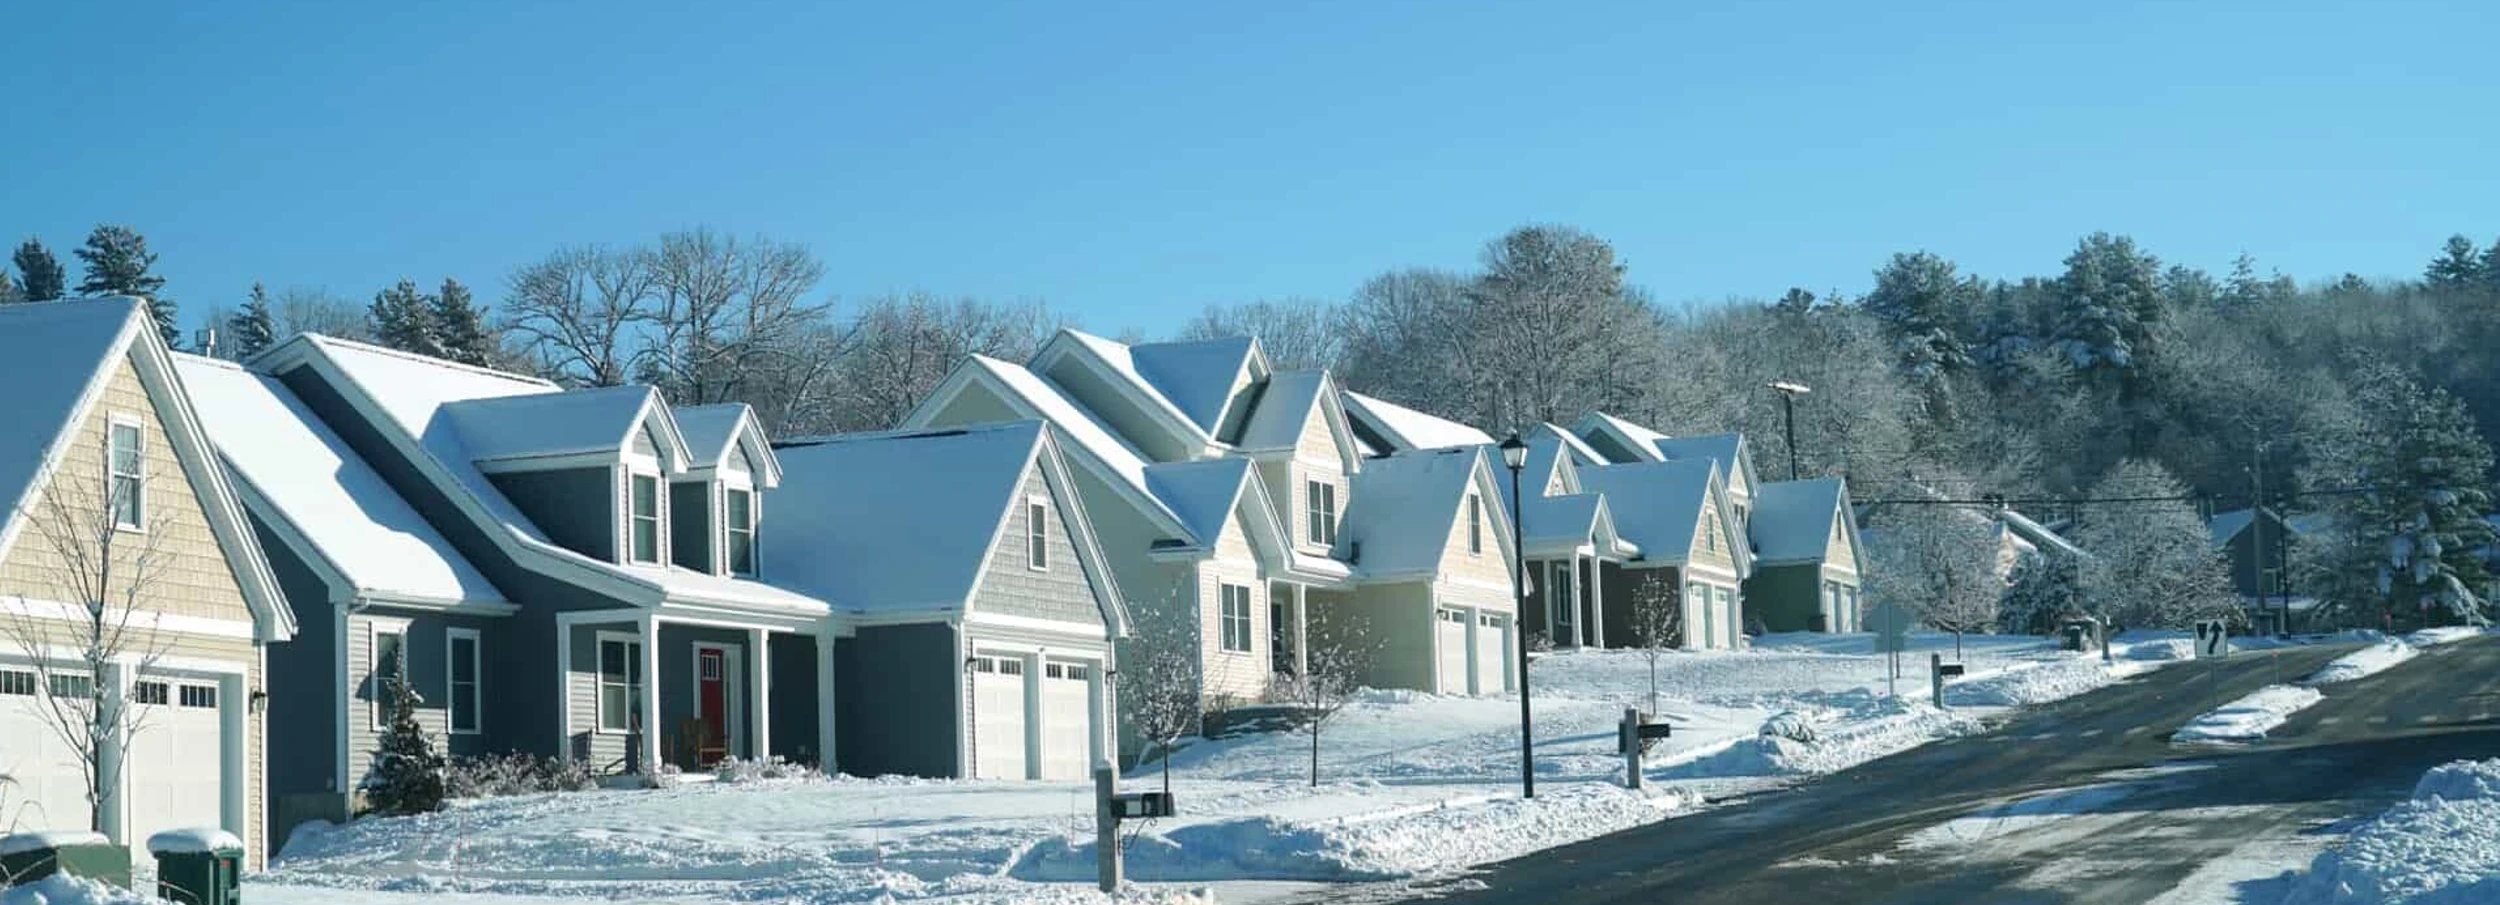 Row of residential houses on snowy hill with plowed road.